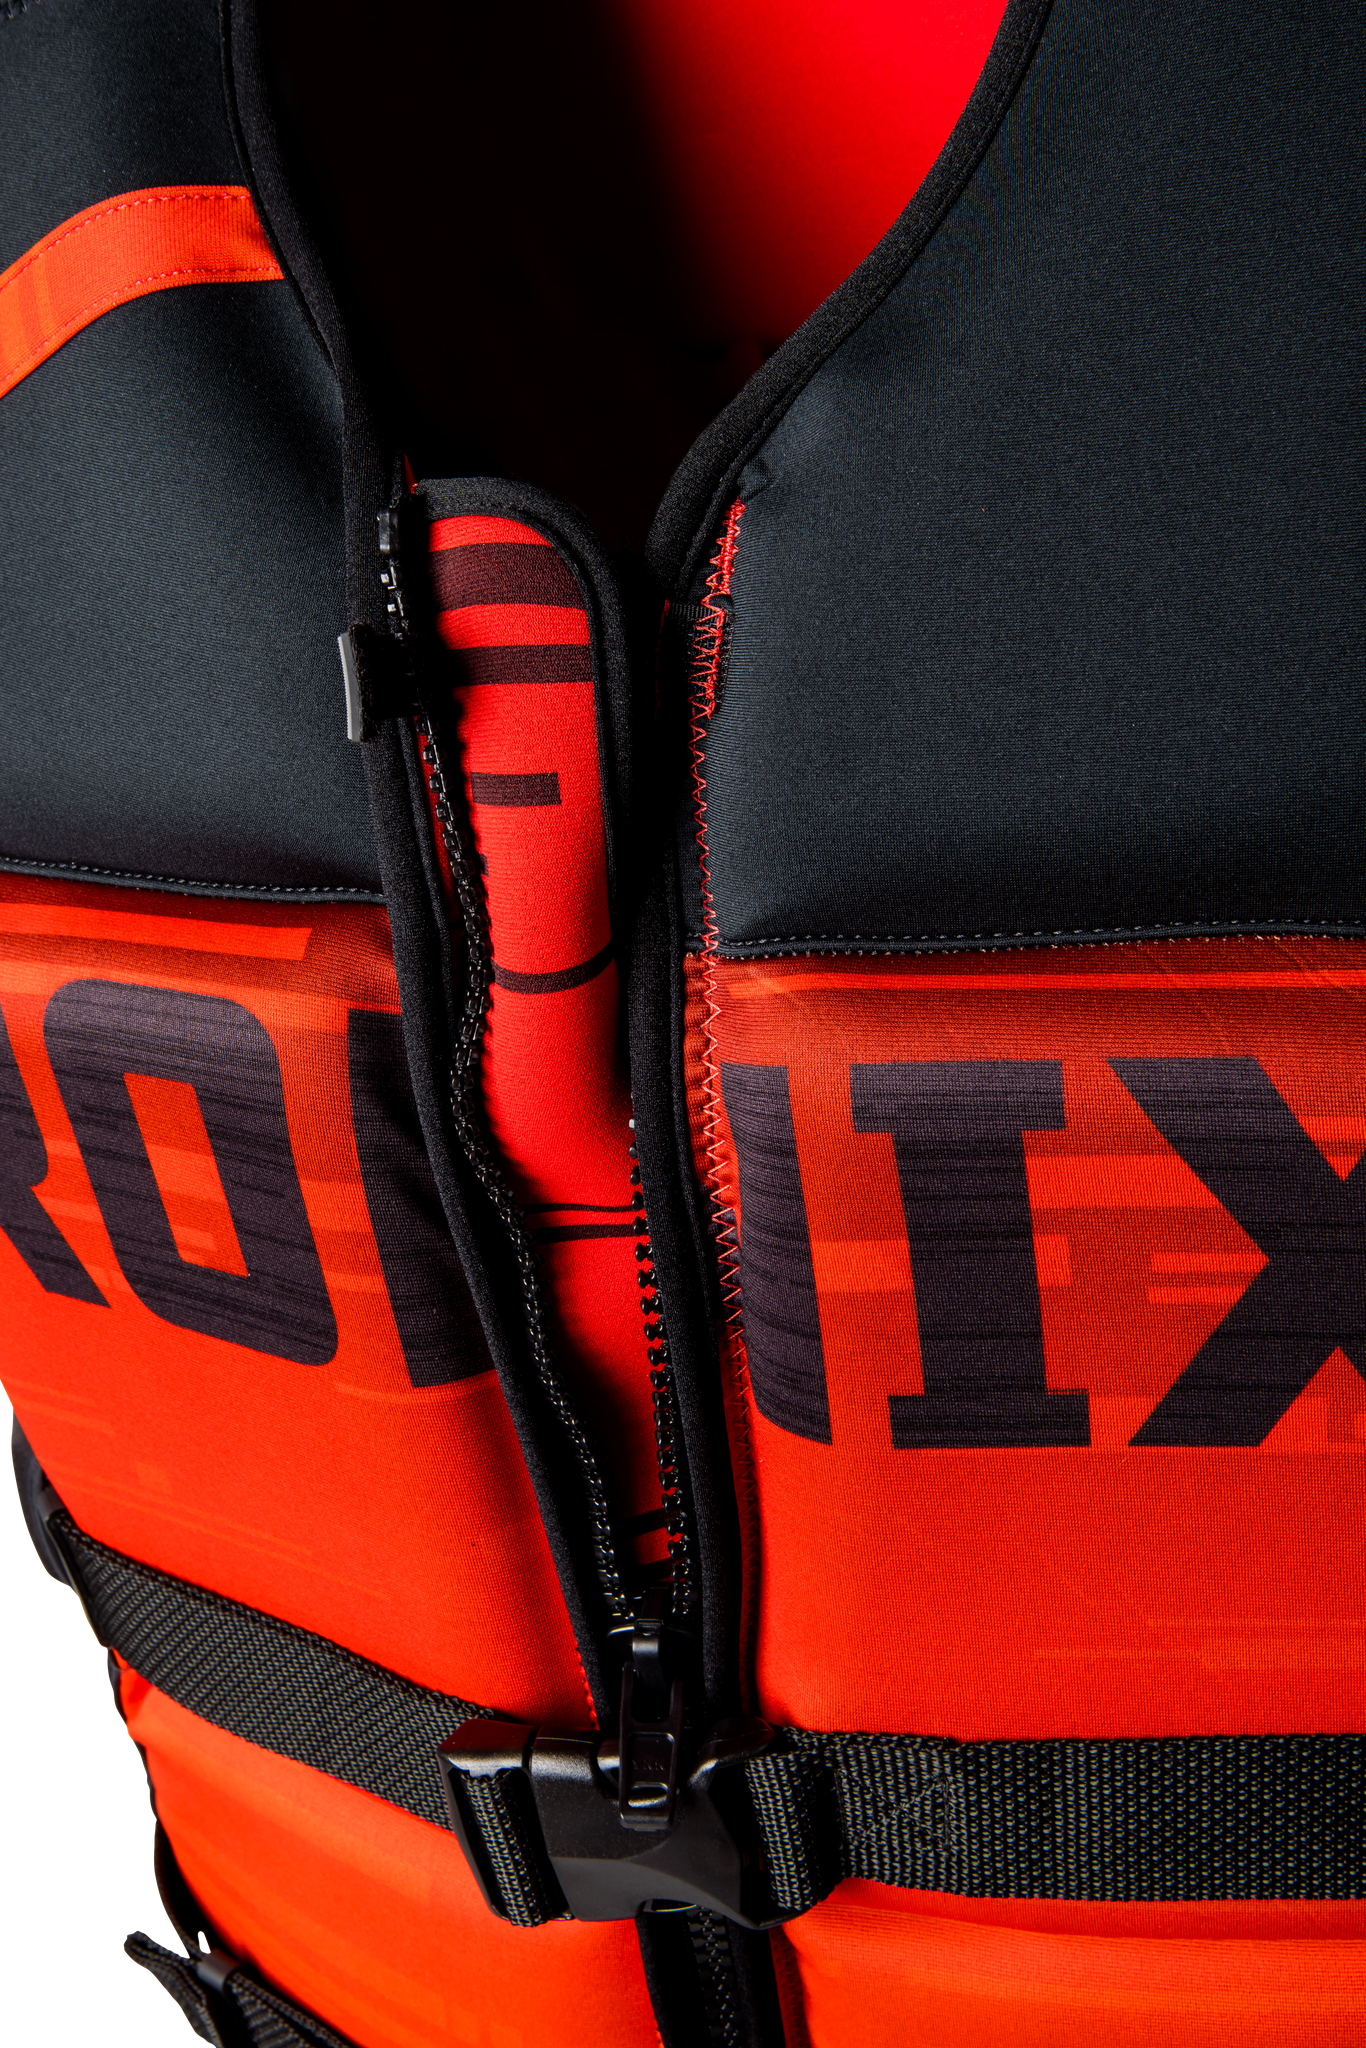 A Ronix Megacorp Capella 3.0 Men's CGA Vest with the brand name Ronix on it.